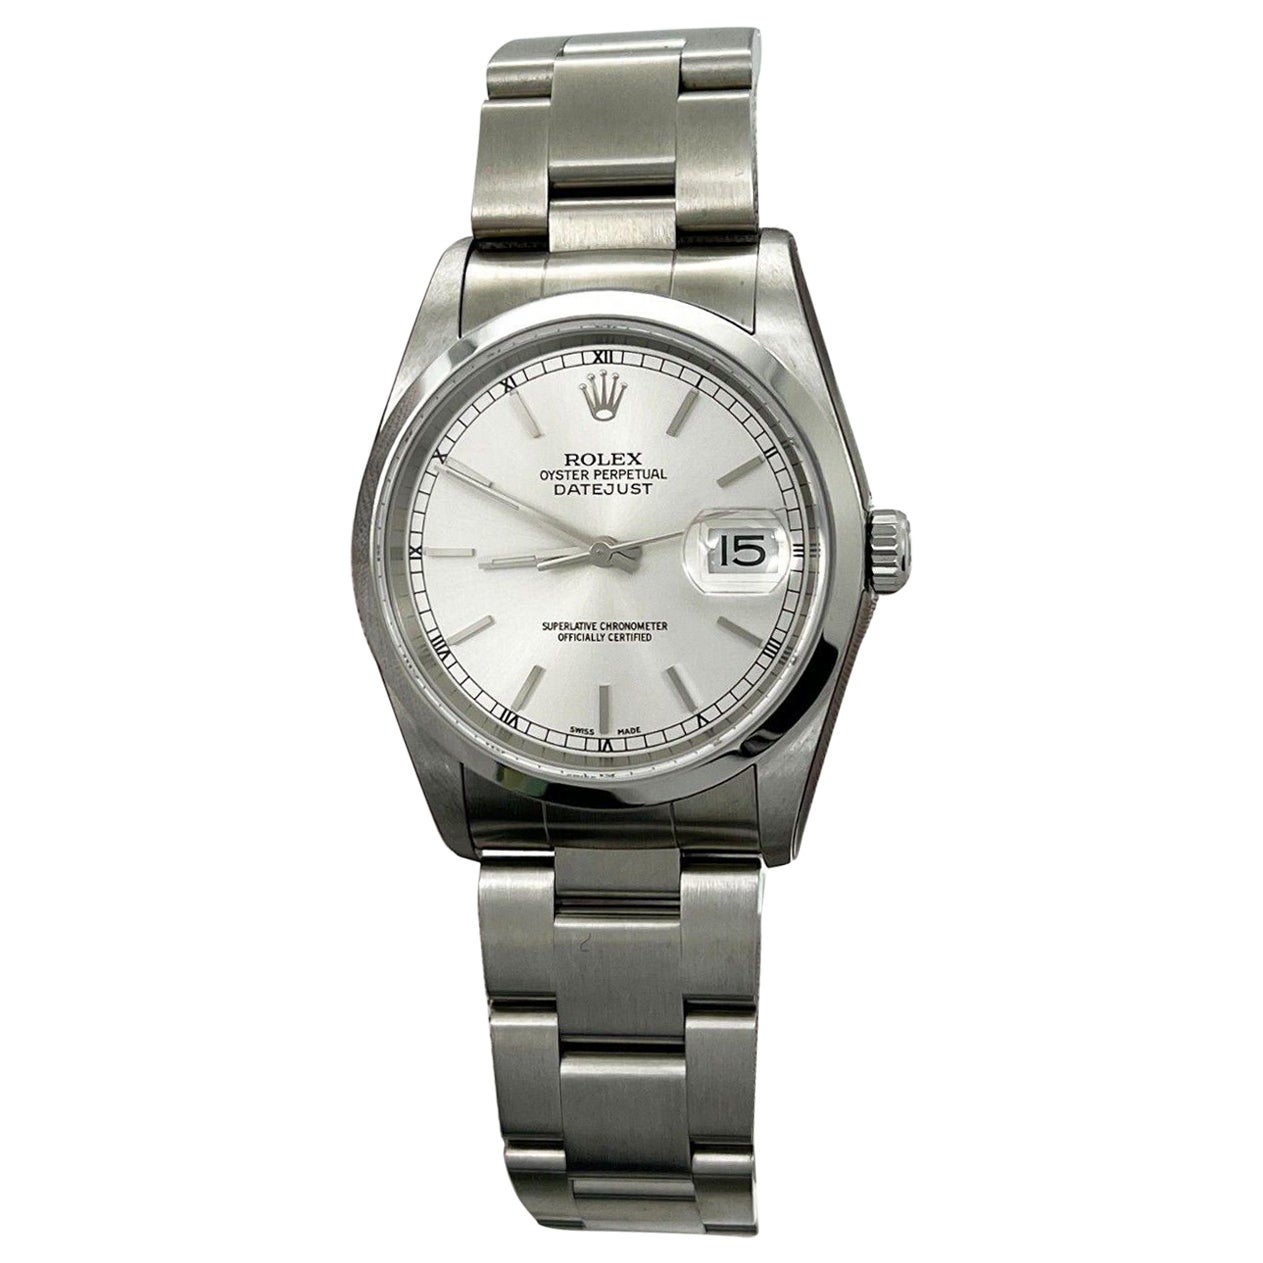 Rolex Datejust 16200 Silver Dial Stainless Steel Box Paper 2005 For Sale